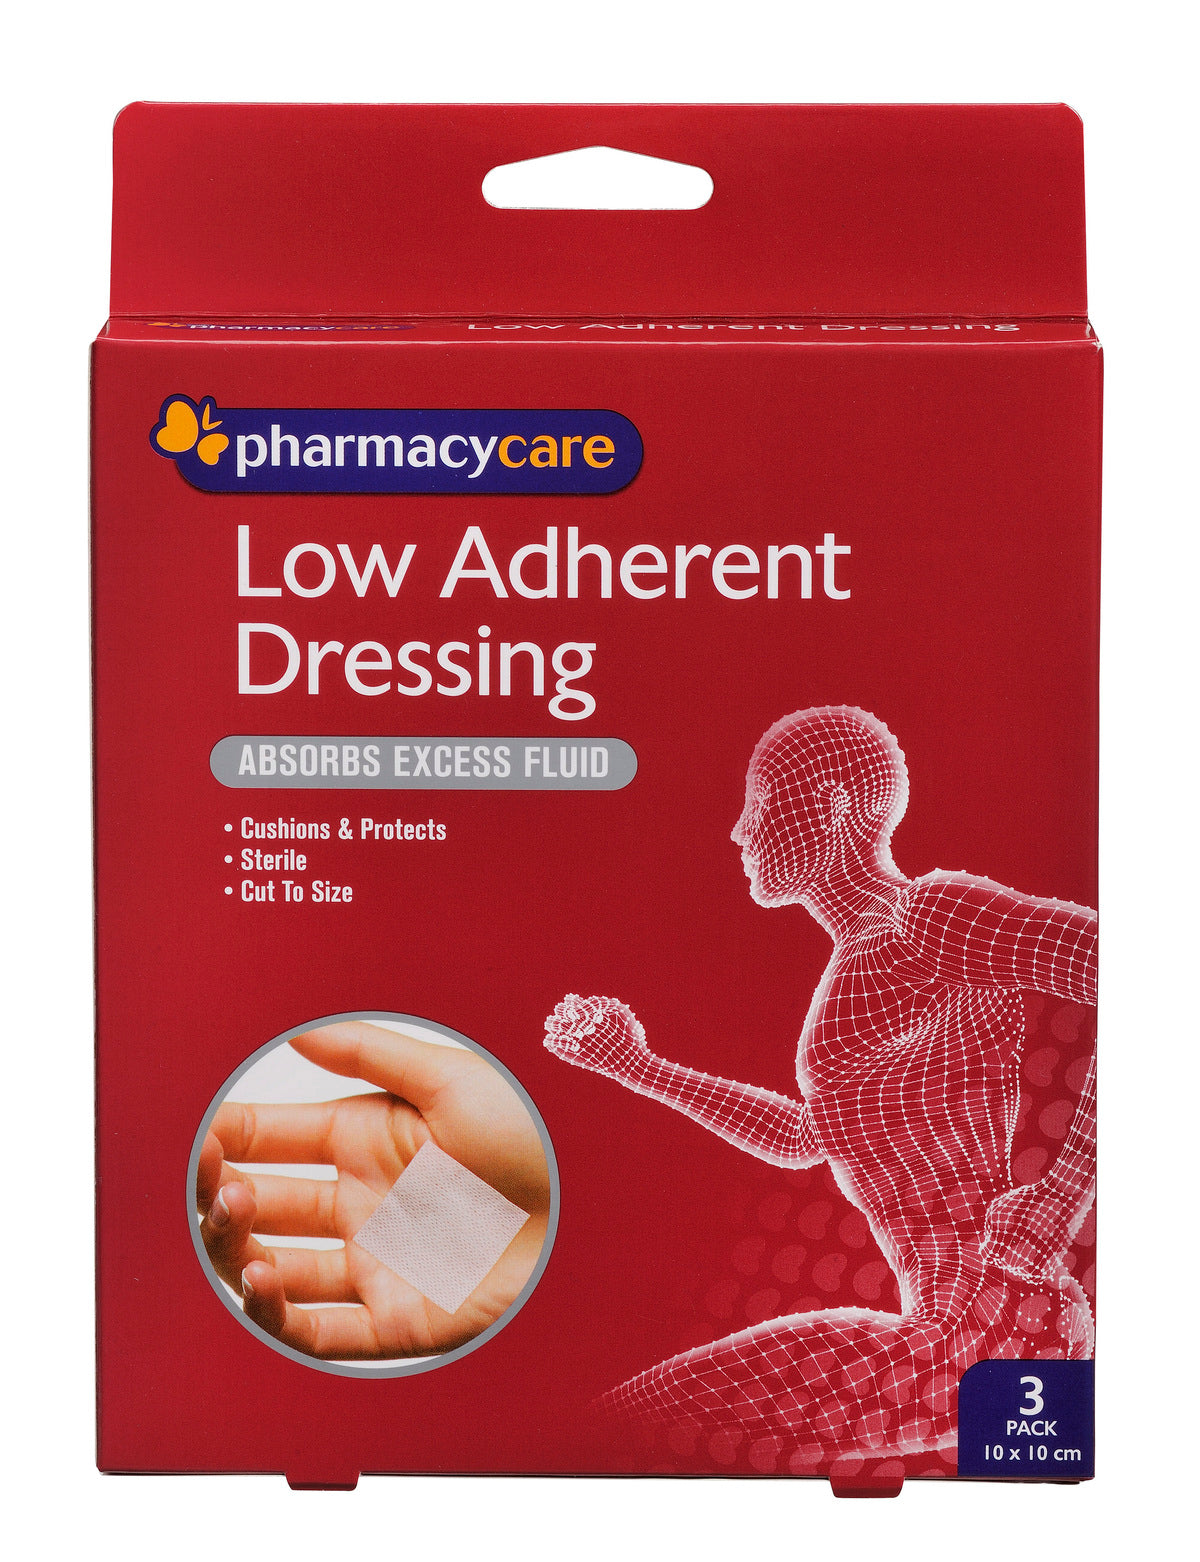 Pharmacy Care Low Adherent Dressing Pack 3